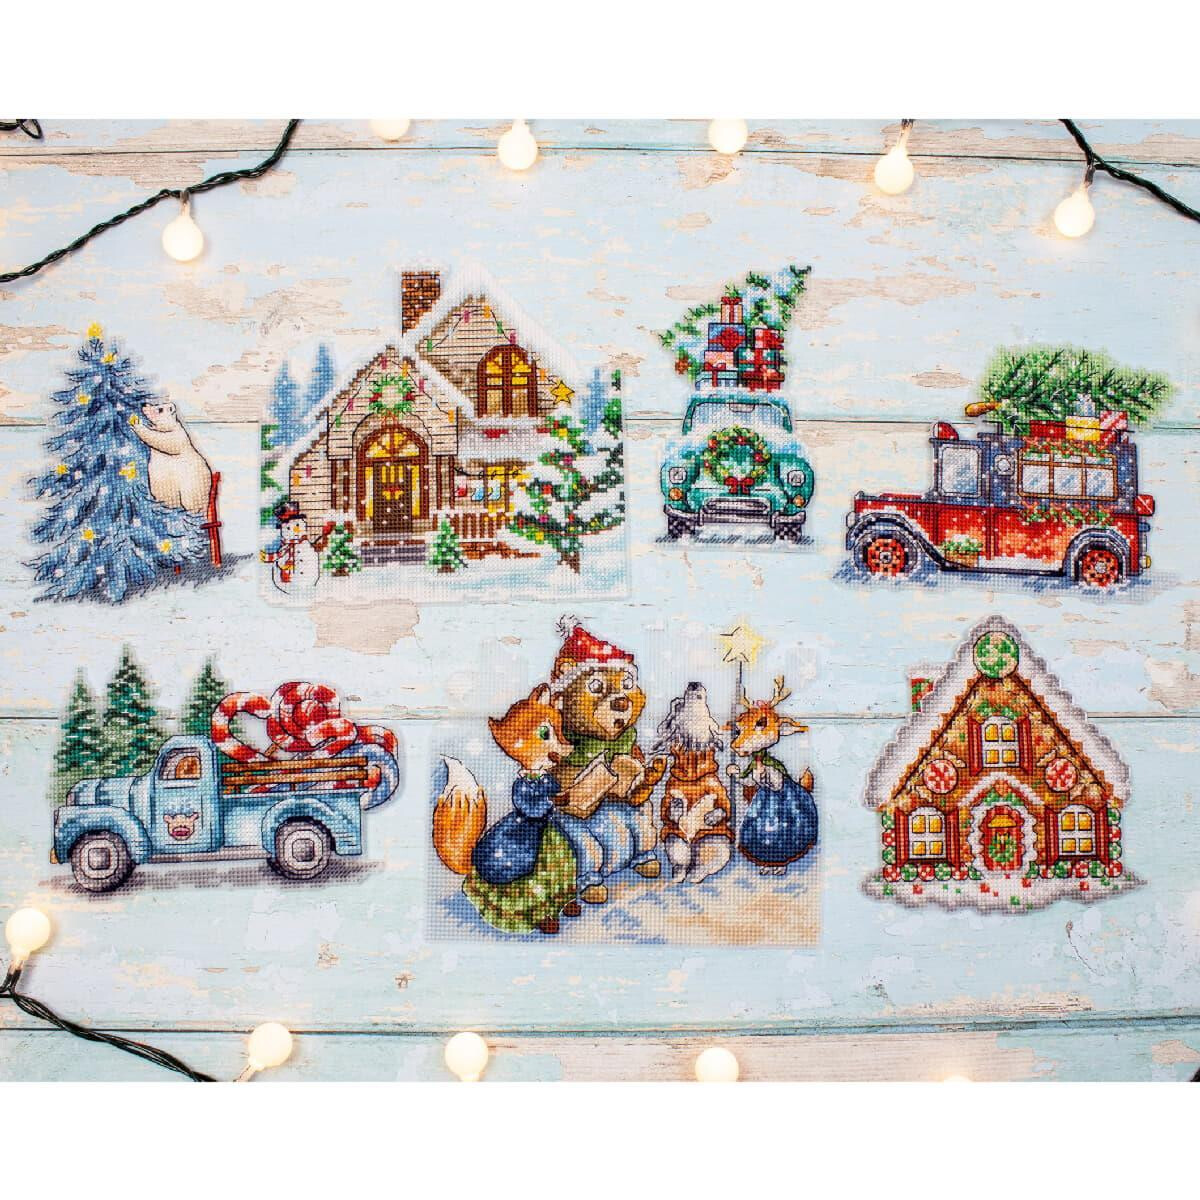 Letistitch counted cross stitch kit "Christmas...